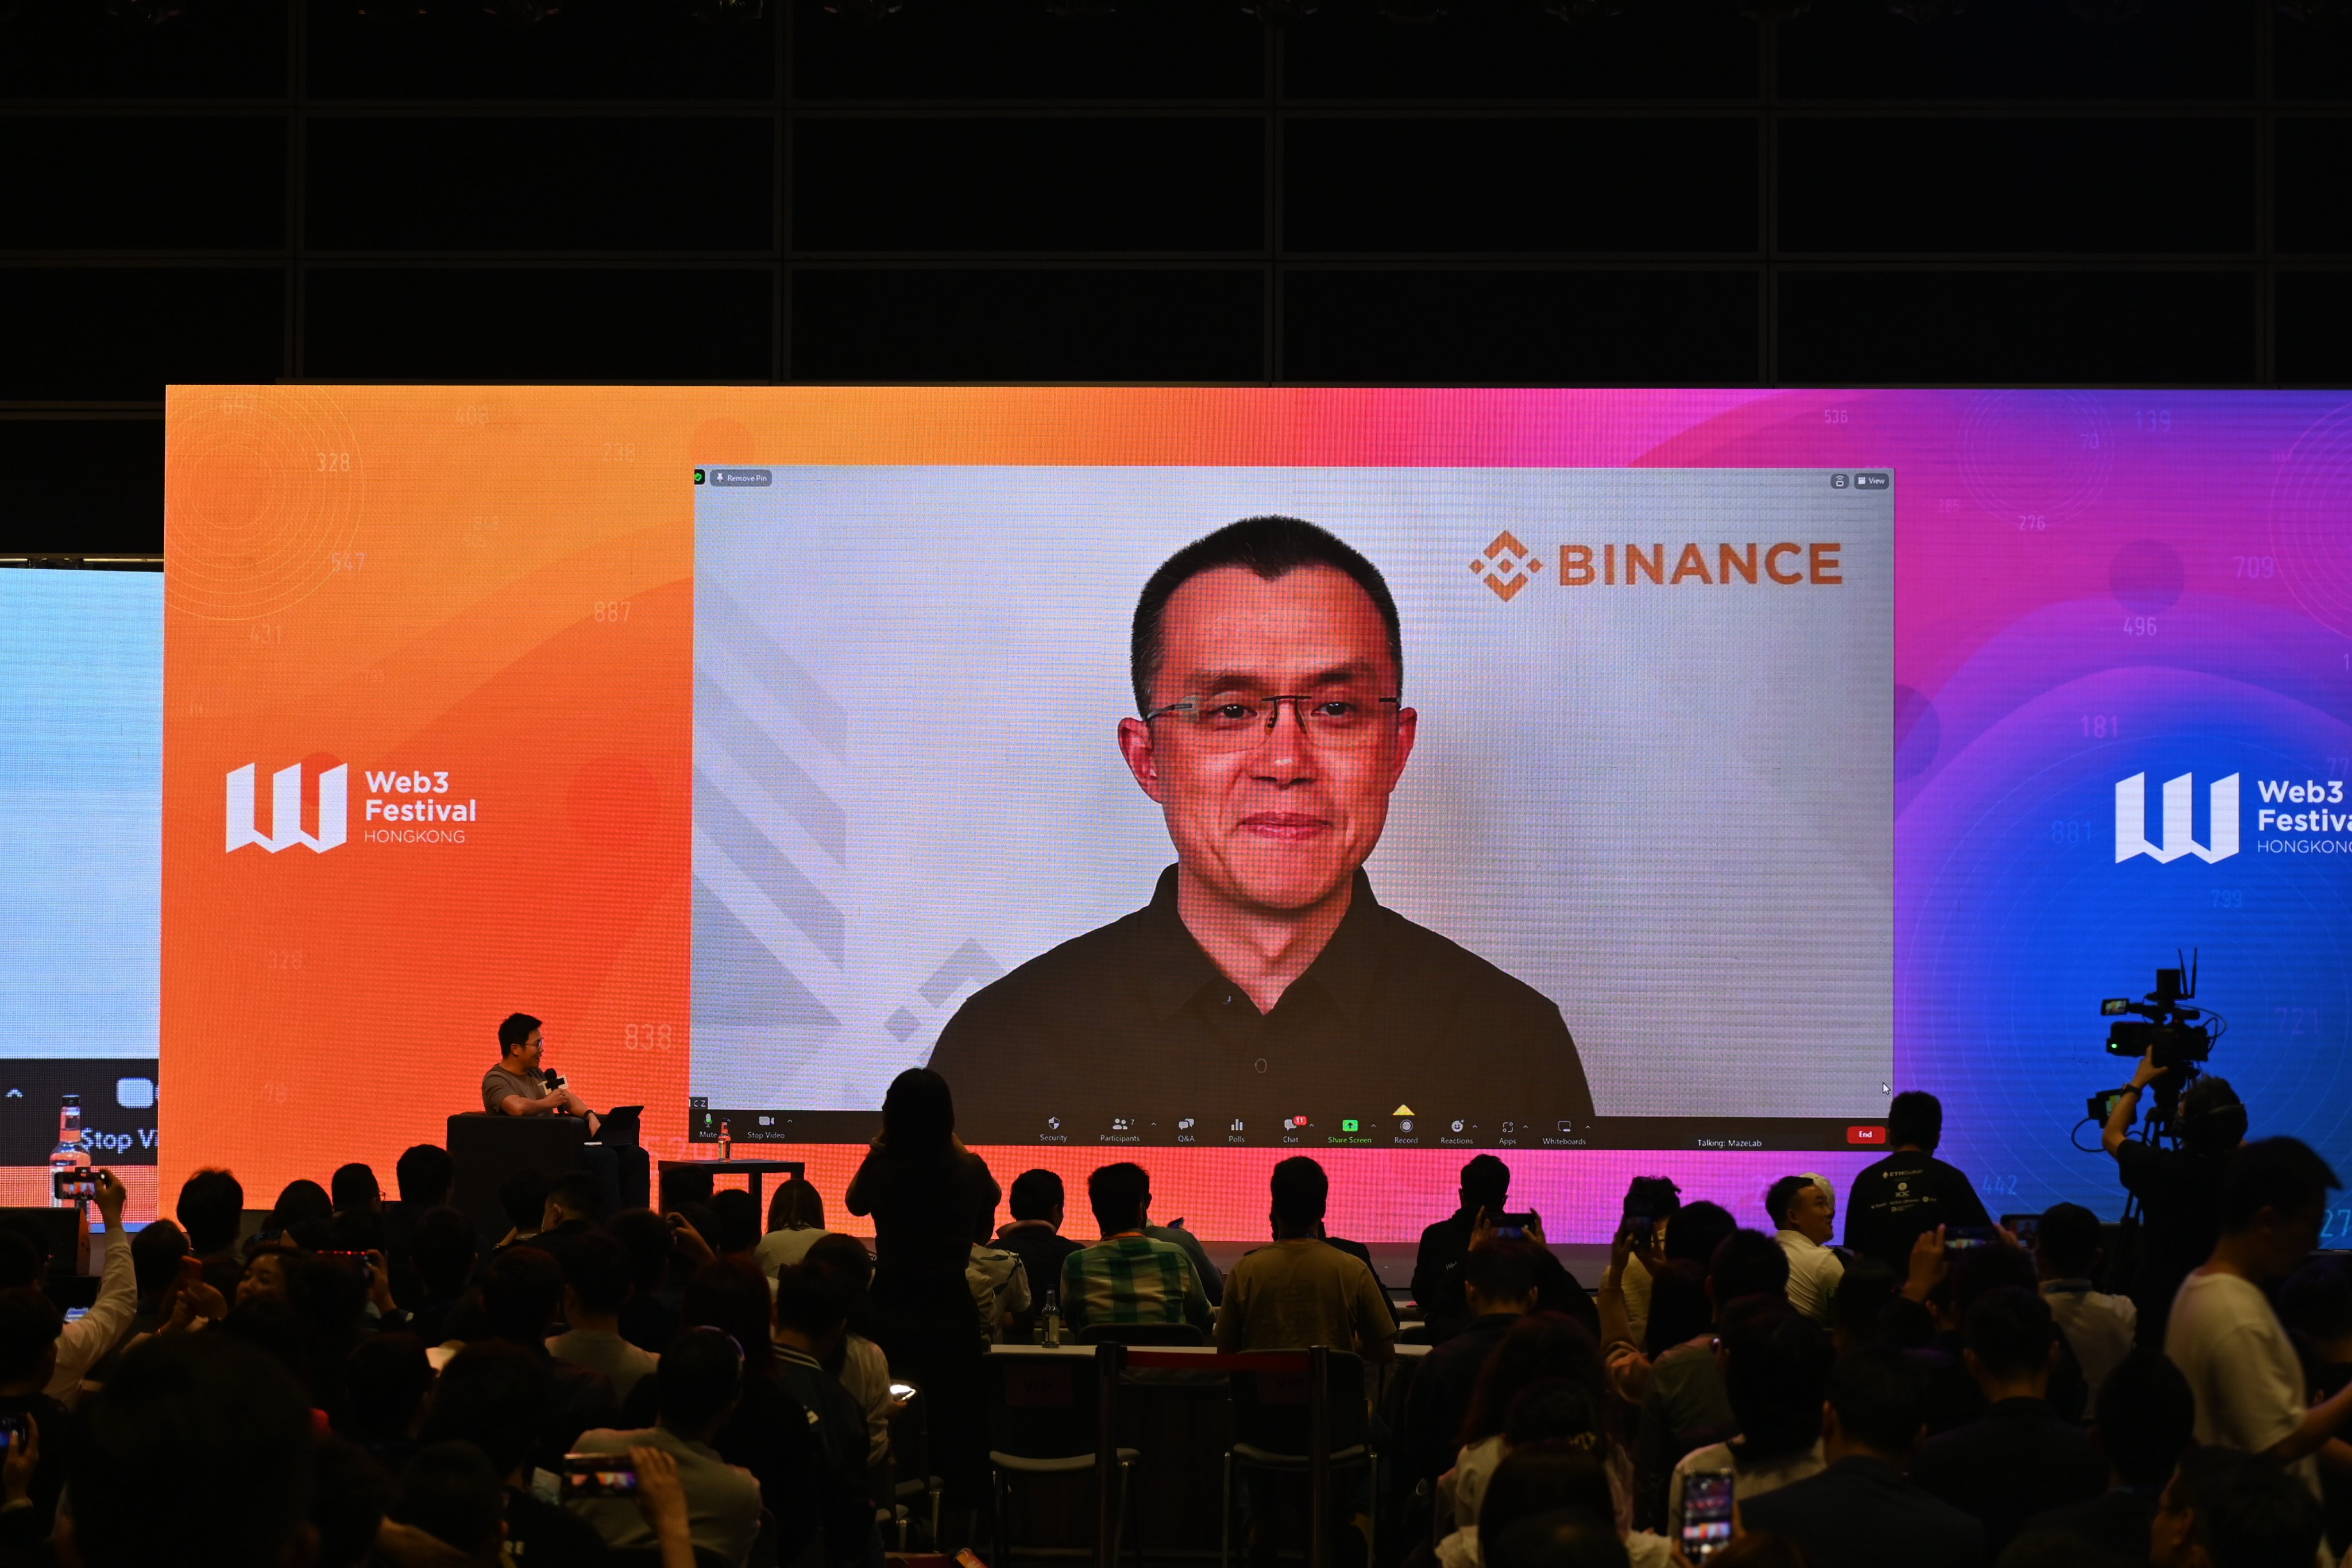 Binance co-founder and CEO Zhao Changpeng speaks during a fireside chat during the Hong Kong Web3 Festival at the Wan Chai Convention and Exhibition Centre on April 12. Photo: Matt Haldane.